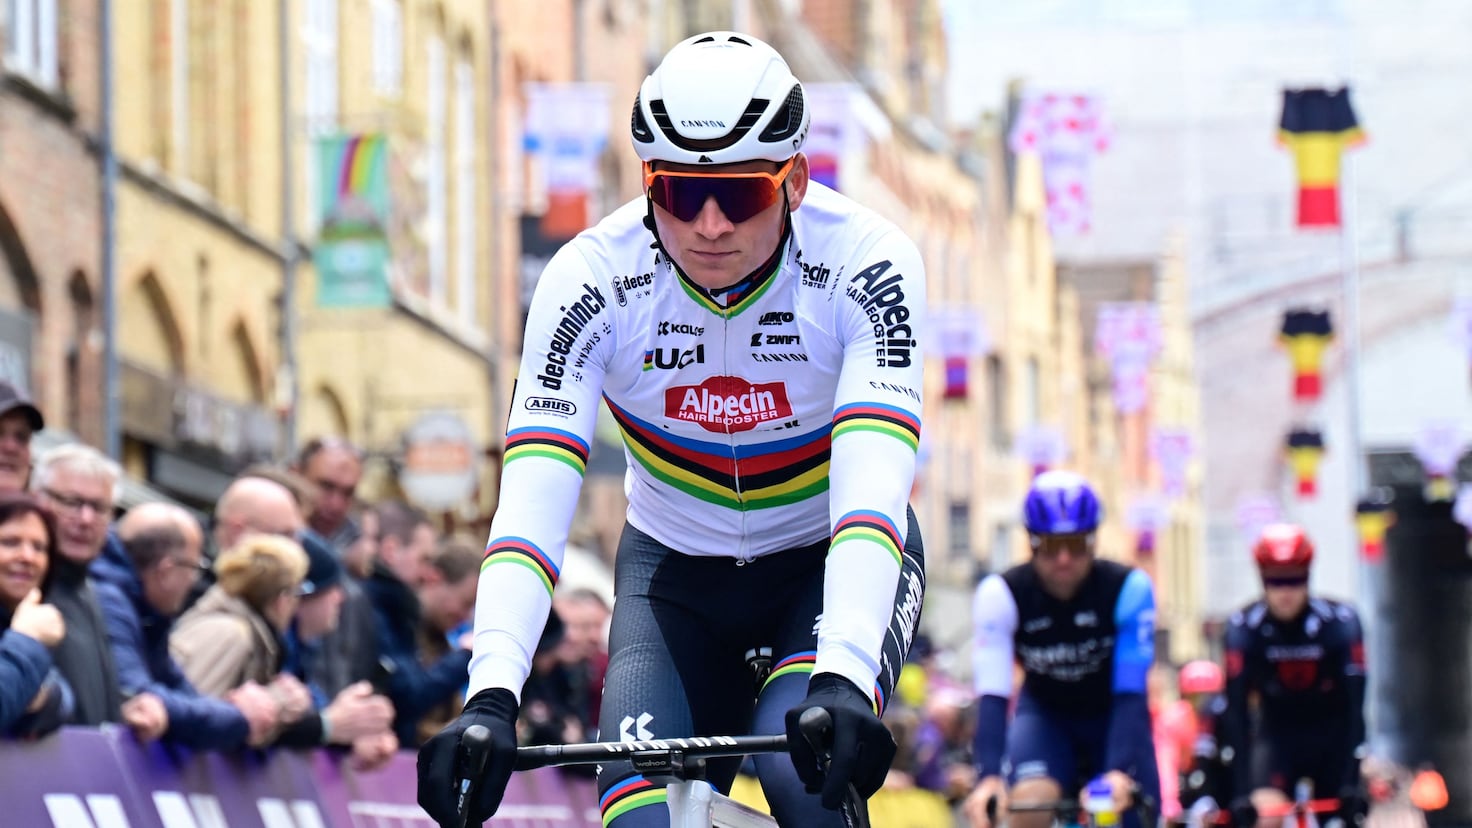 Van der Poel, “Home Alone” on the Tour of Flanders

